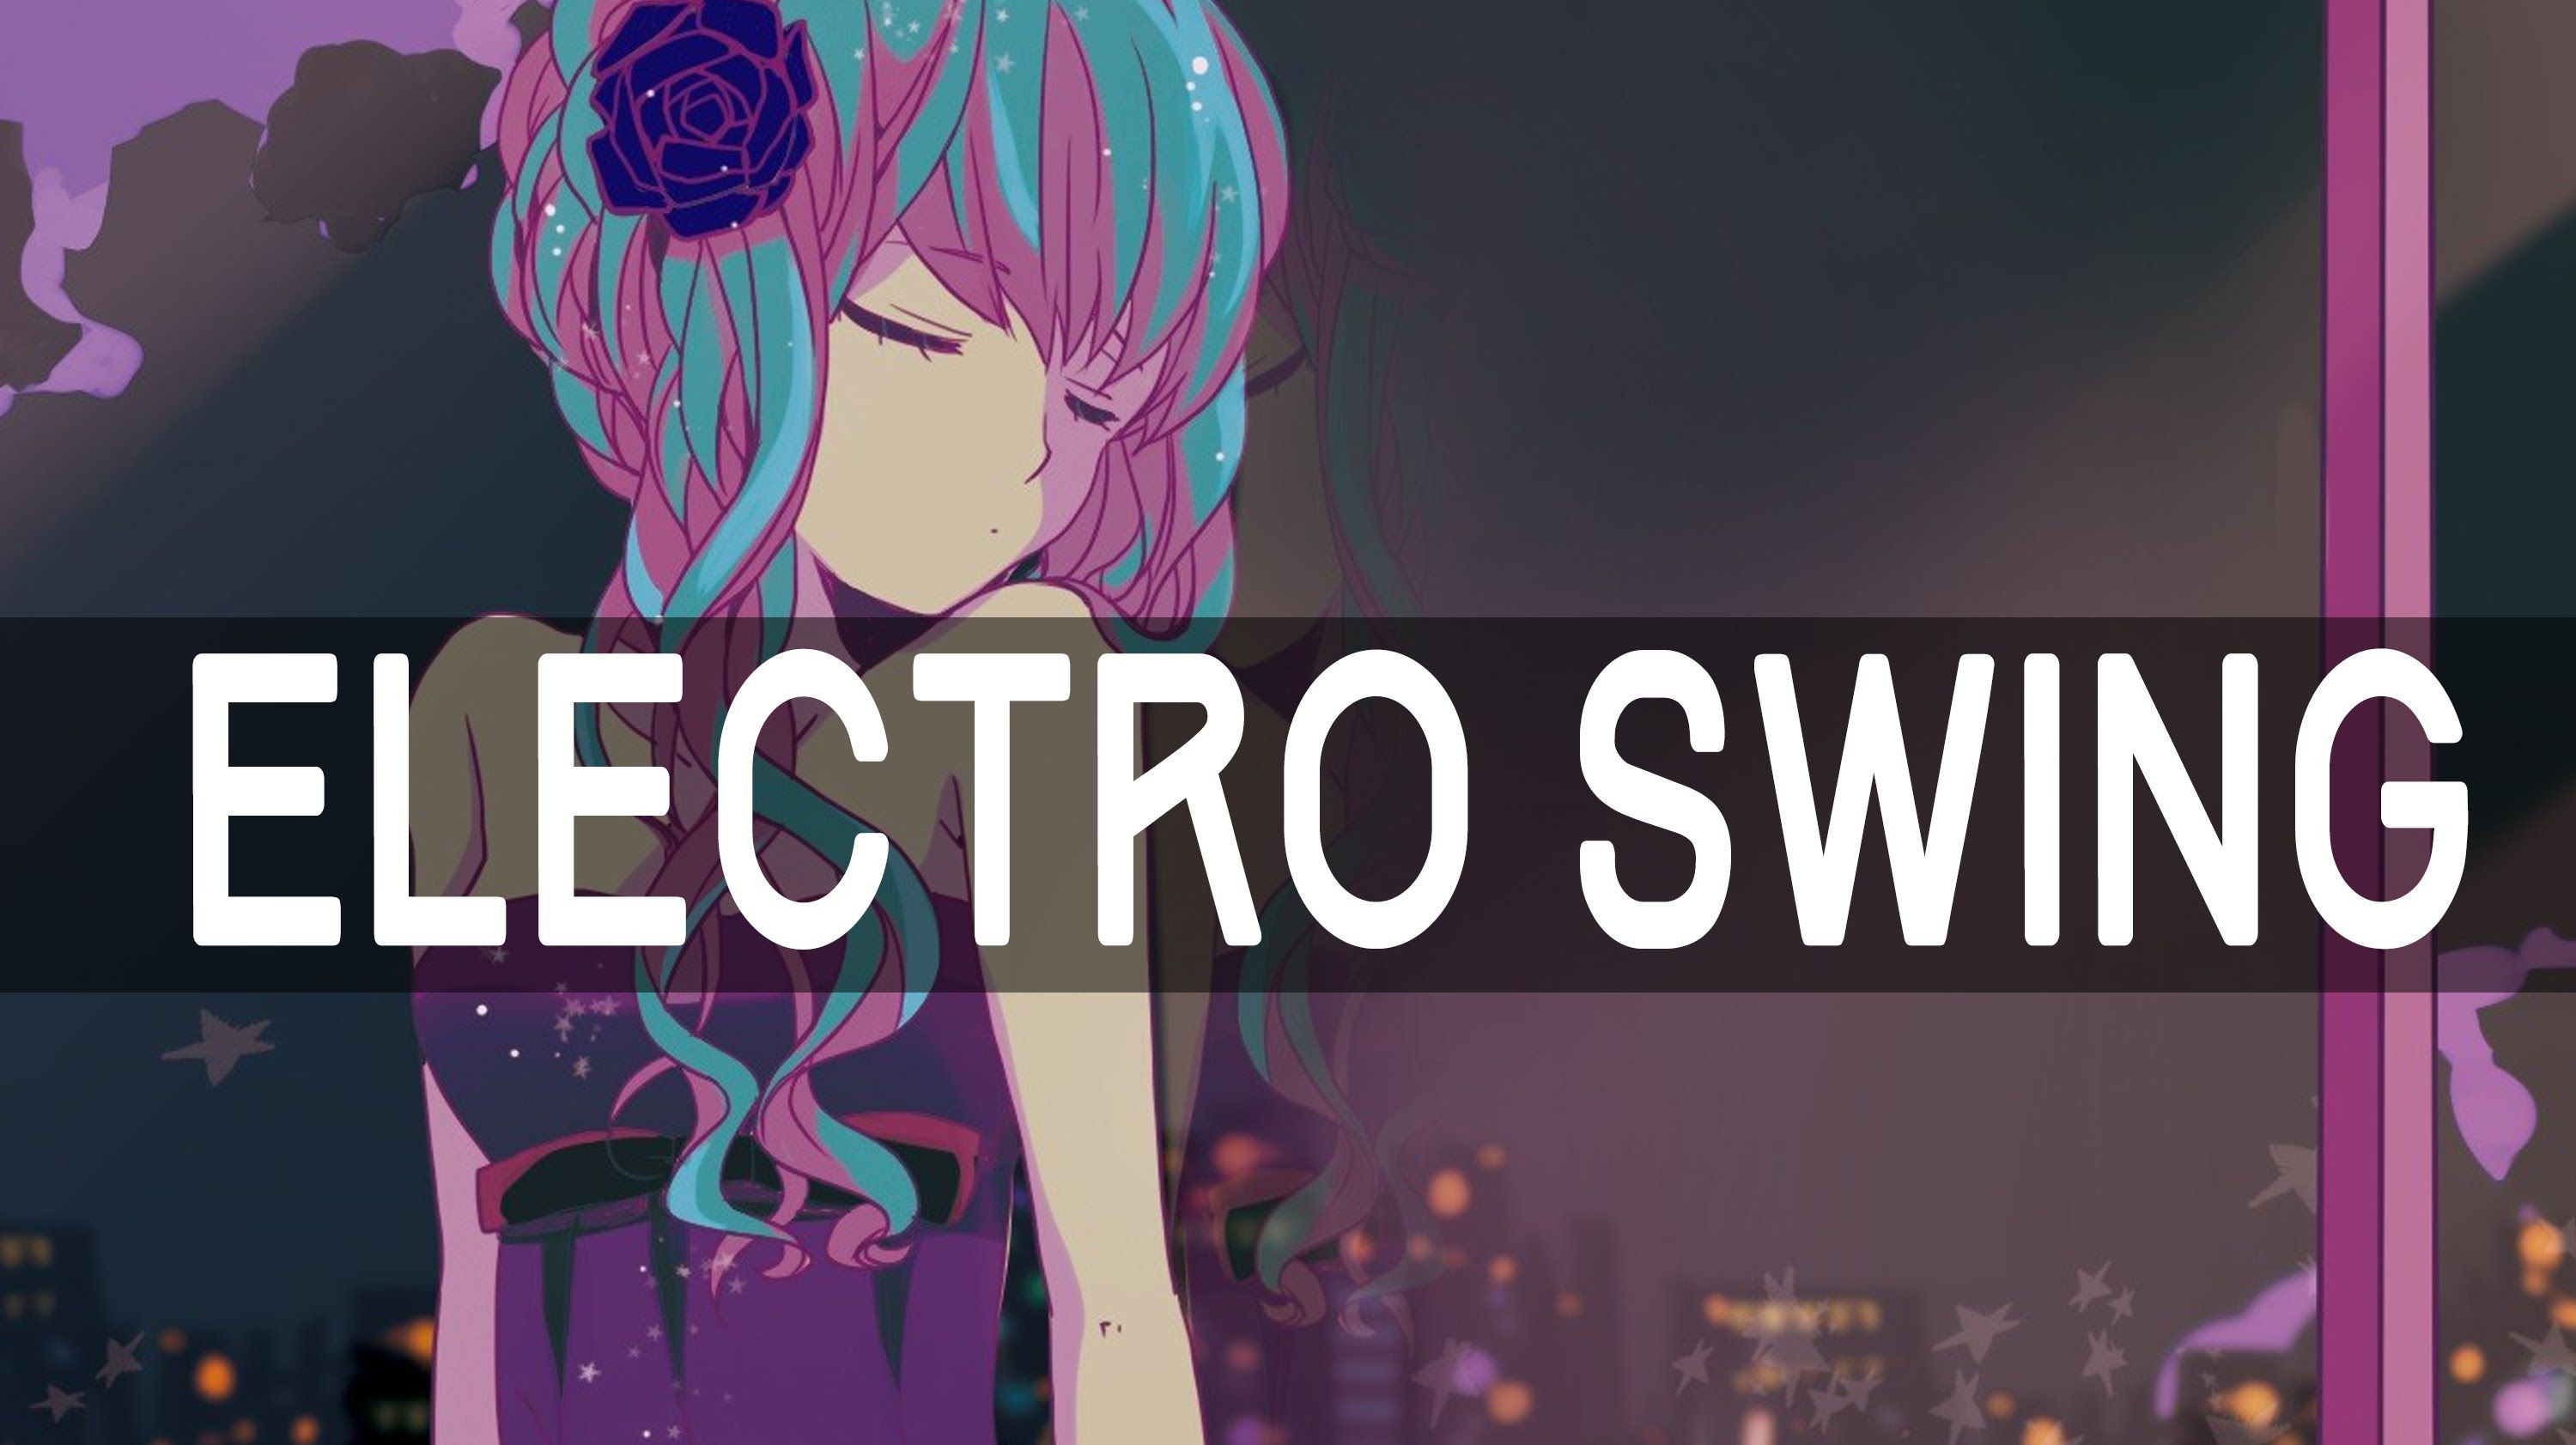 Electro Swing
 I m back with more awesome electro swing Drop a like to